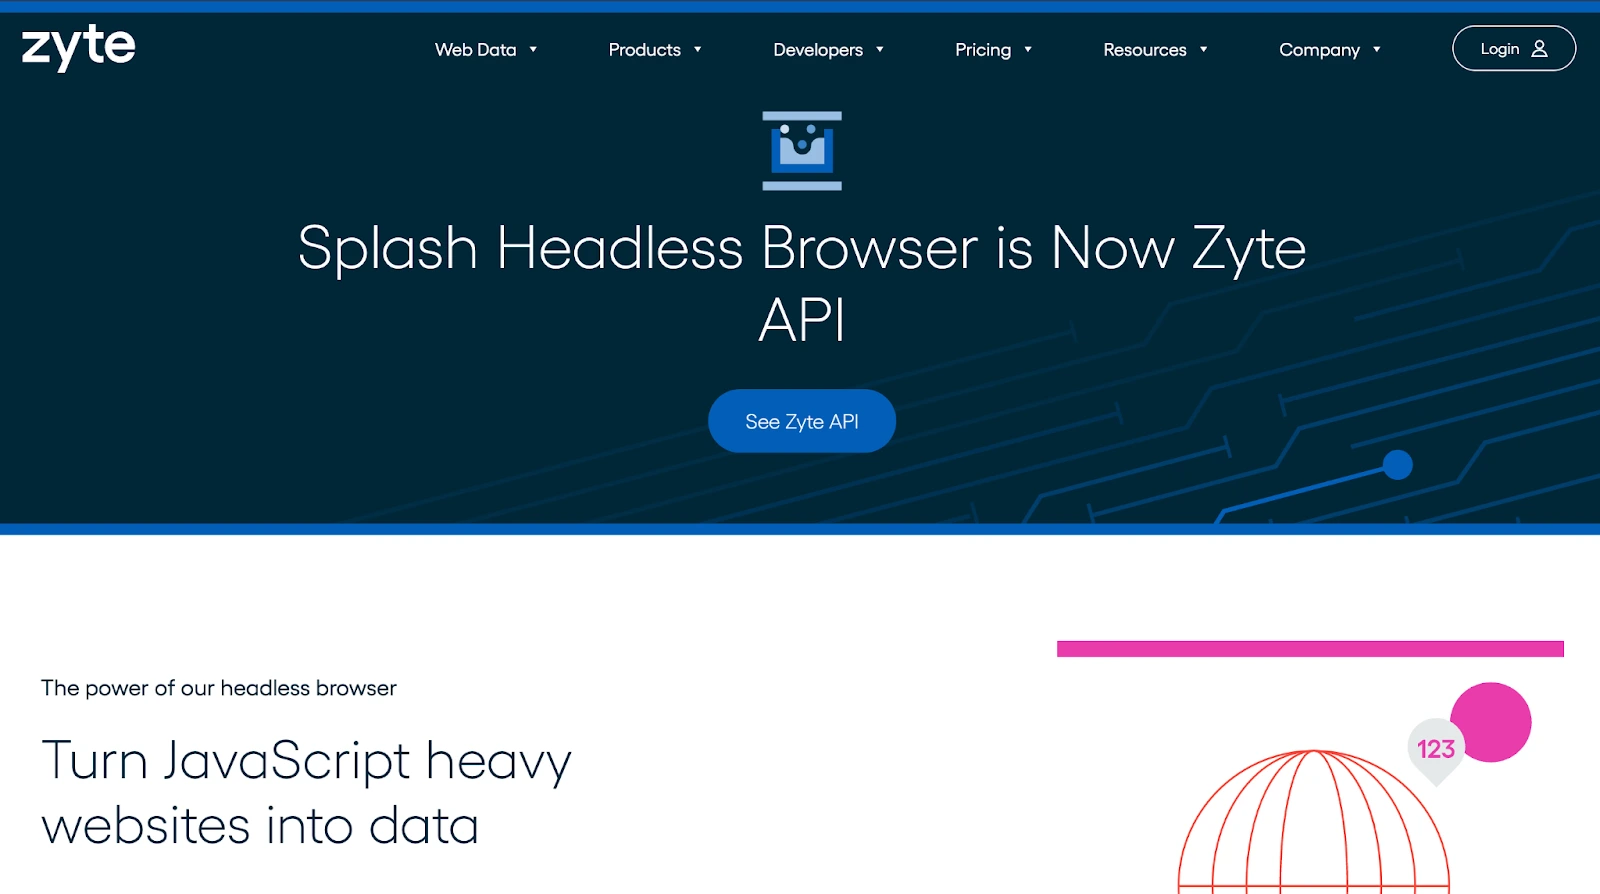 Splash is free and open source